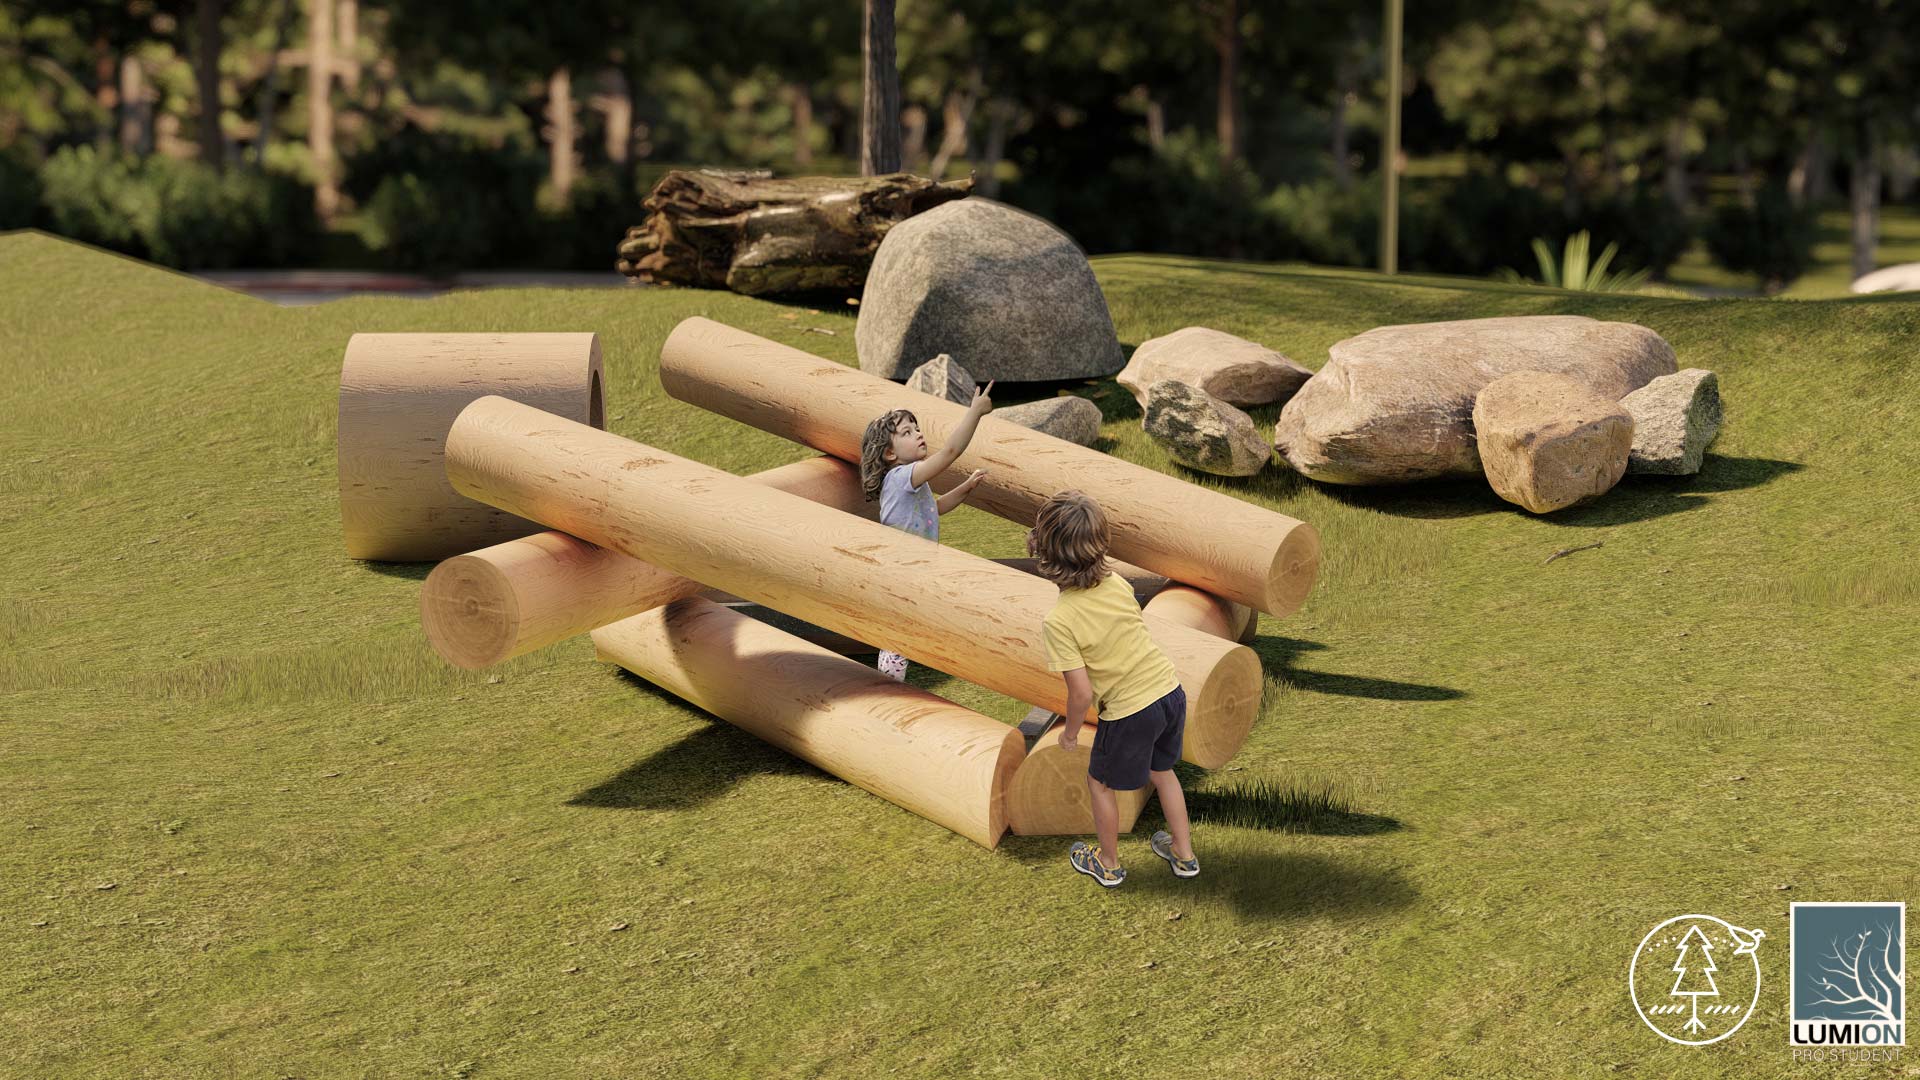 Natural Impressions log tangles are natural cedar playground elements perfect for hours of play